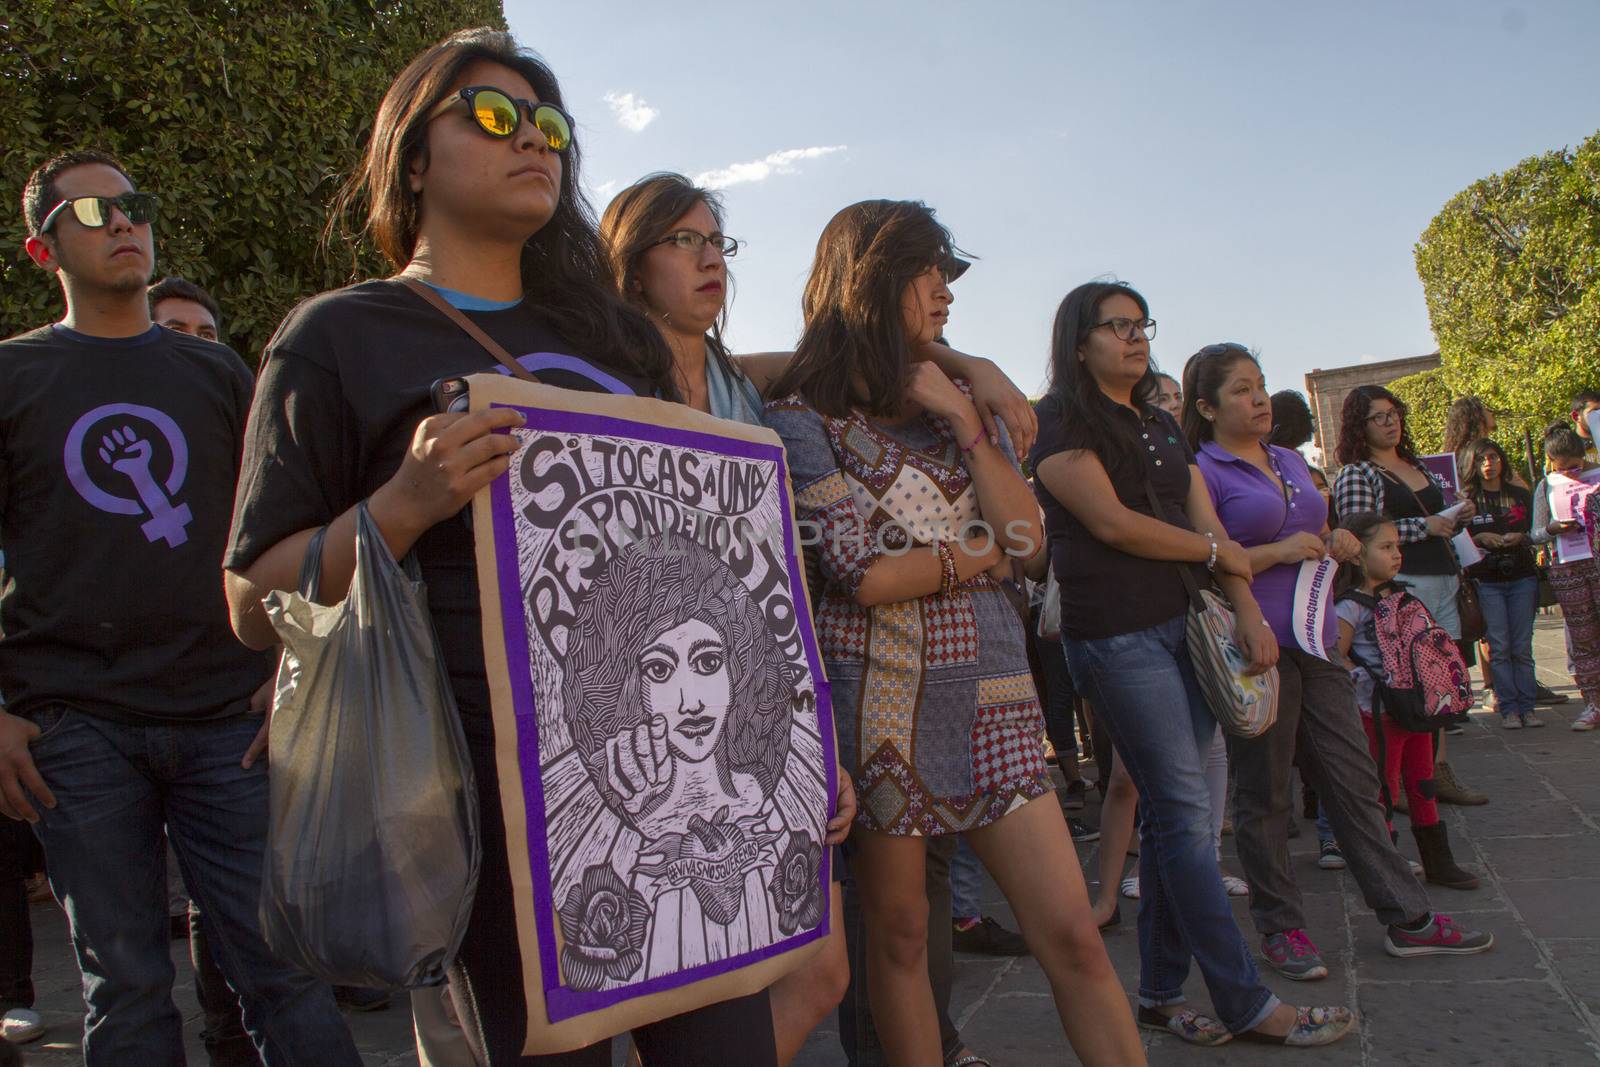 MEXICO, Morelia: Hundreds demonstrate against sexual violence to women and hold placards reading Vivas Nos Queremos, or We want to live at Plaza Benito Juarez, in Morelia, central Mexico, on April 24, 2016 as a group of women in Mexico have launched few days earlier a social media campaign encouraging people to speak out against sexual assault under the hashtag #NoTeCalles, or Don't Stay Silent. In June 2015, UN officials has said Mexico ranks among the world's 20 worst countries for violence against women. Several cities in the country held similar protest. 